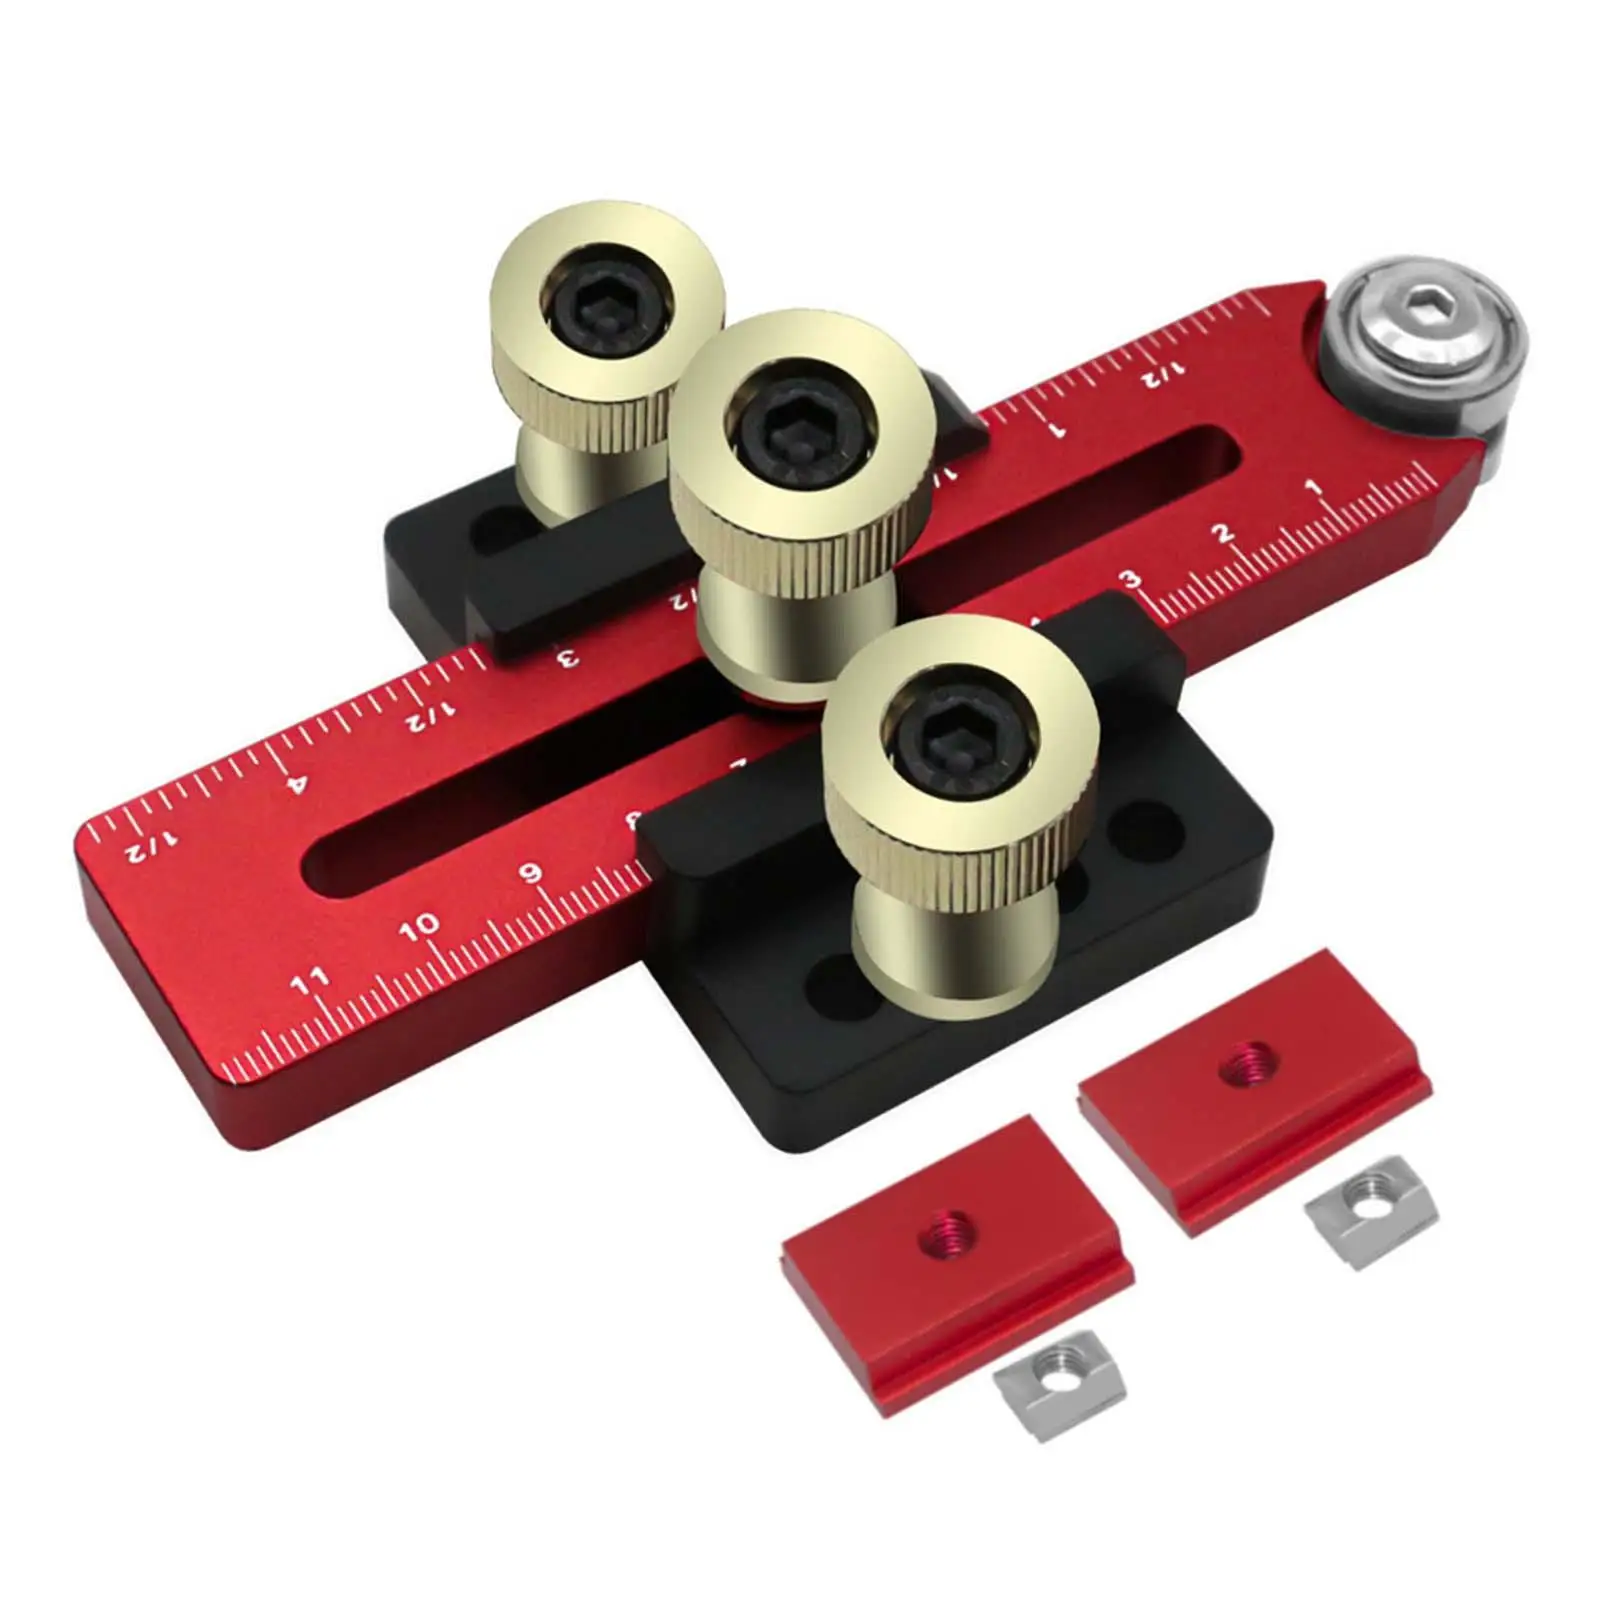 Extended Thin Jig for Repeat Narrow Strip Cuts Professional Fence Guide Workbench Push Guide T Screw Fixture Slot Machine